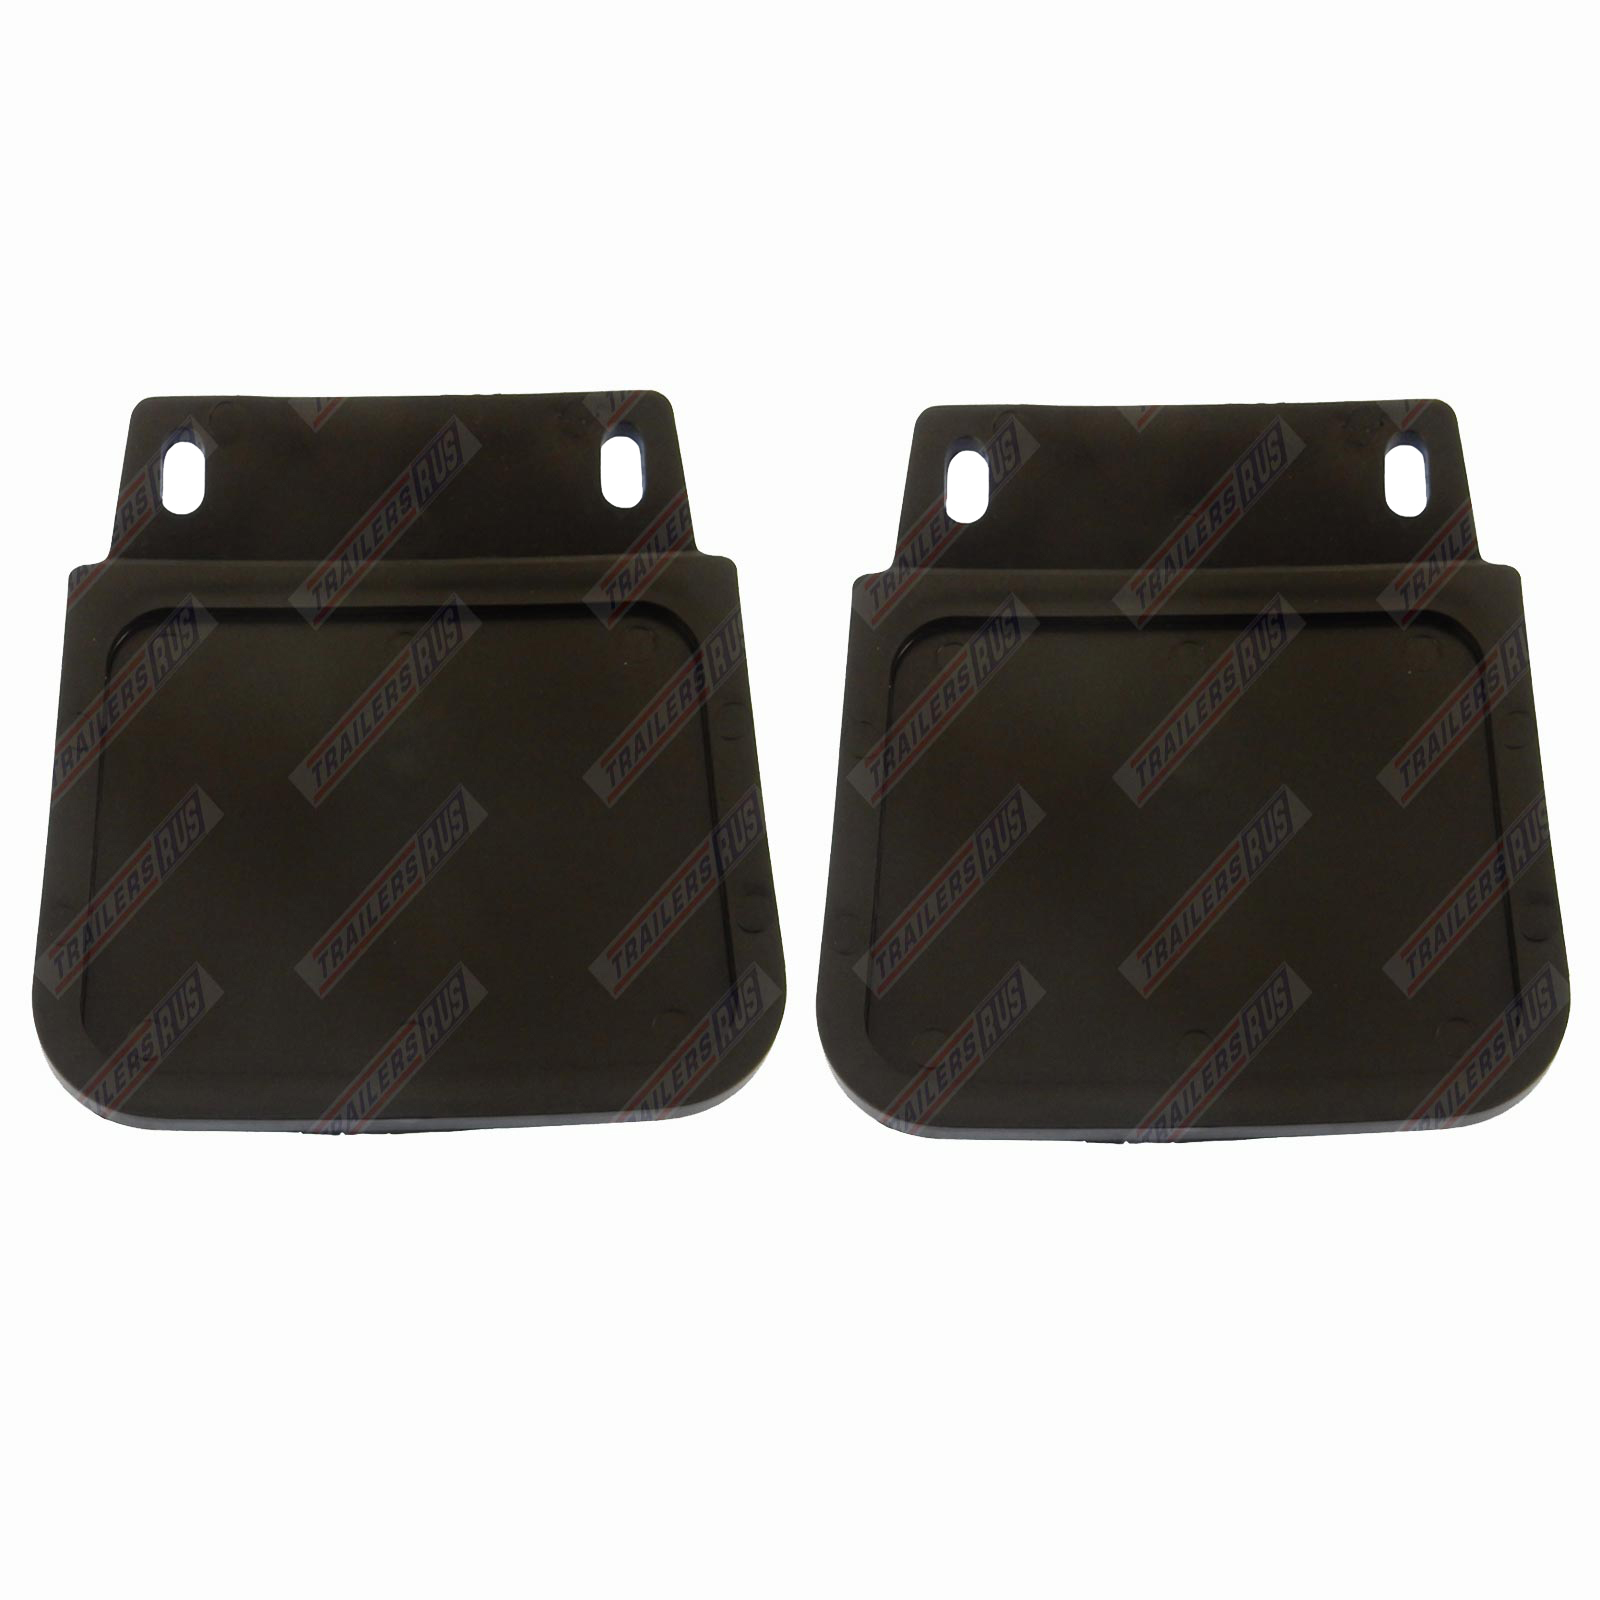 Set of 2 Pcs Heavy Duty Rubber Rear Mudguards Mud Flaps with Reflective Embossed Inscription for Truck Lorry Trailer 59 x 39 cm/23.2 x 15.4 